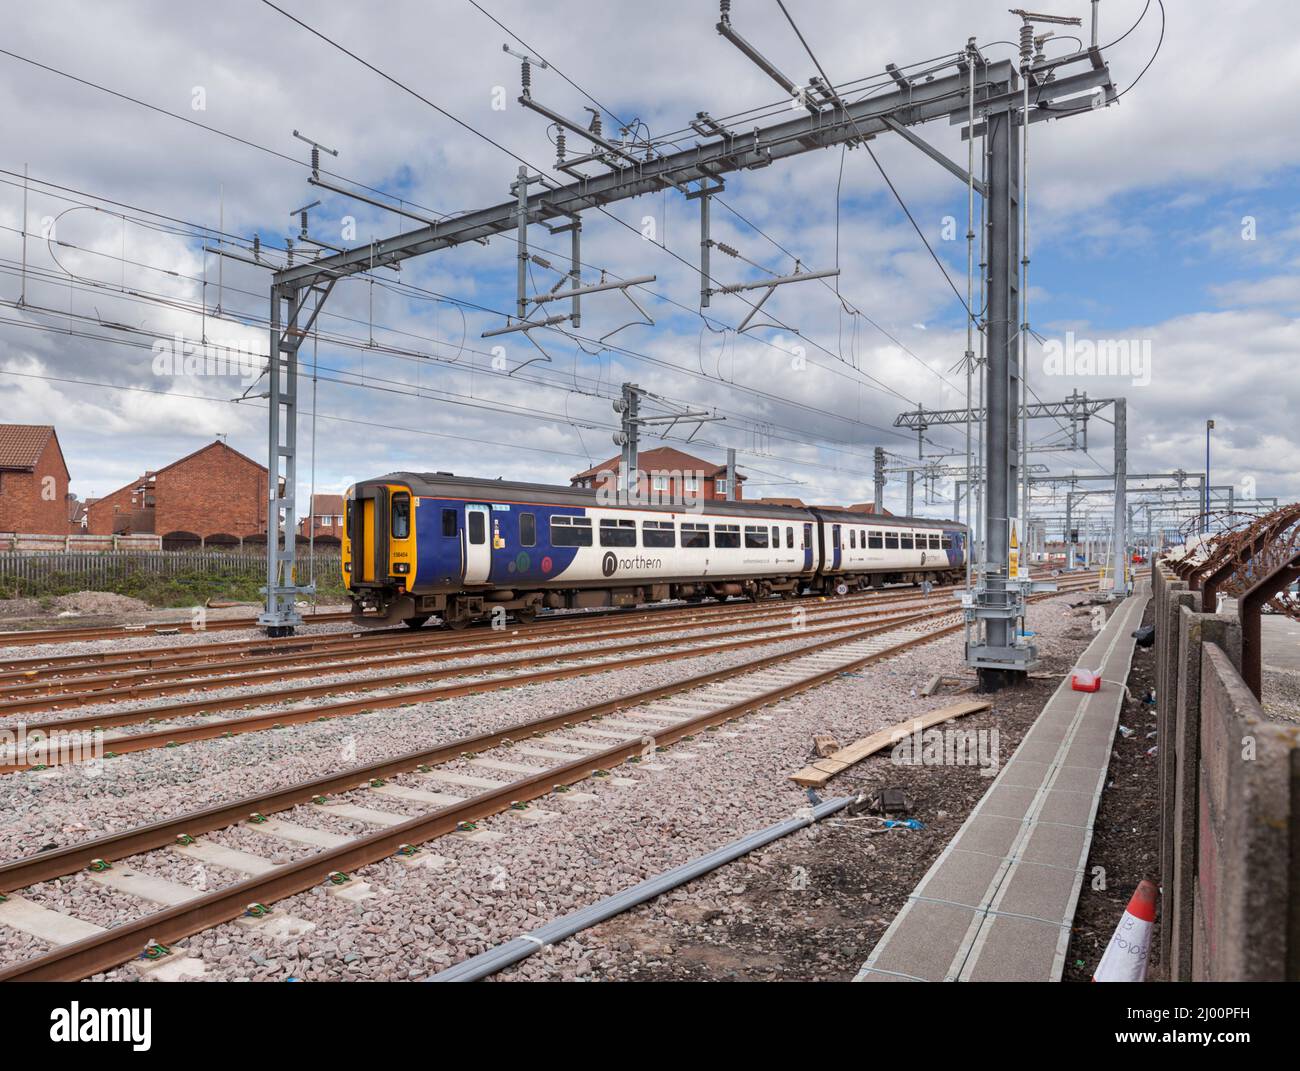 Northern Rail class 156 diesel sprinter train 156454 arriving at the electrified  Blackpool North station Stock Photo